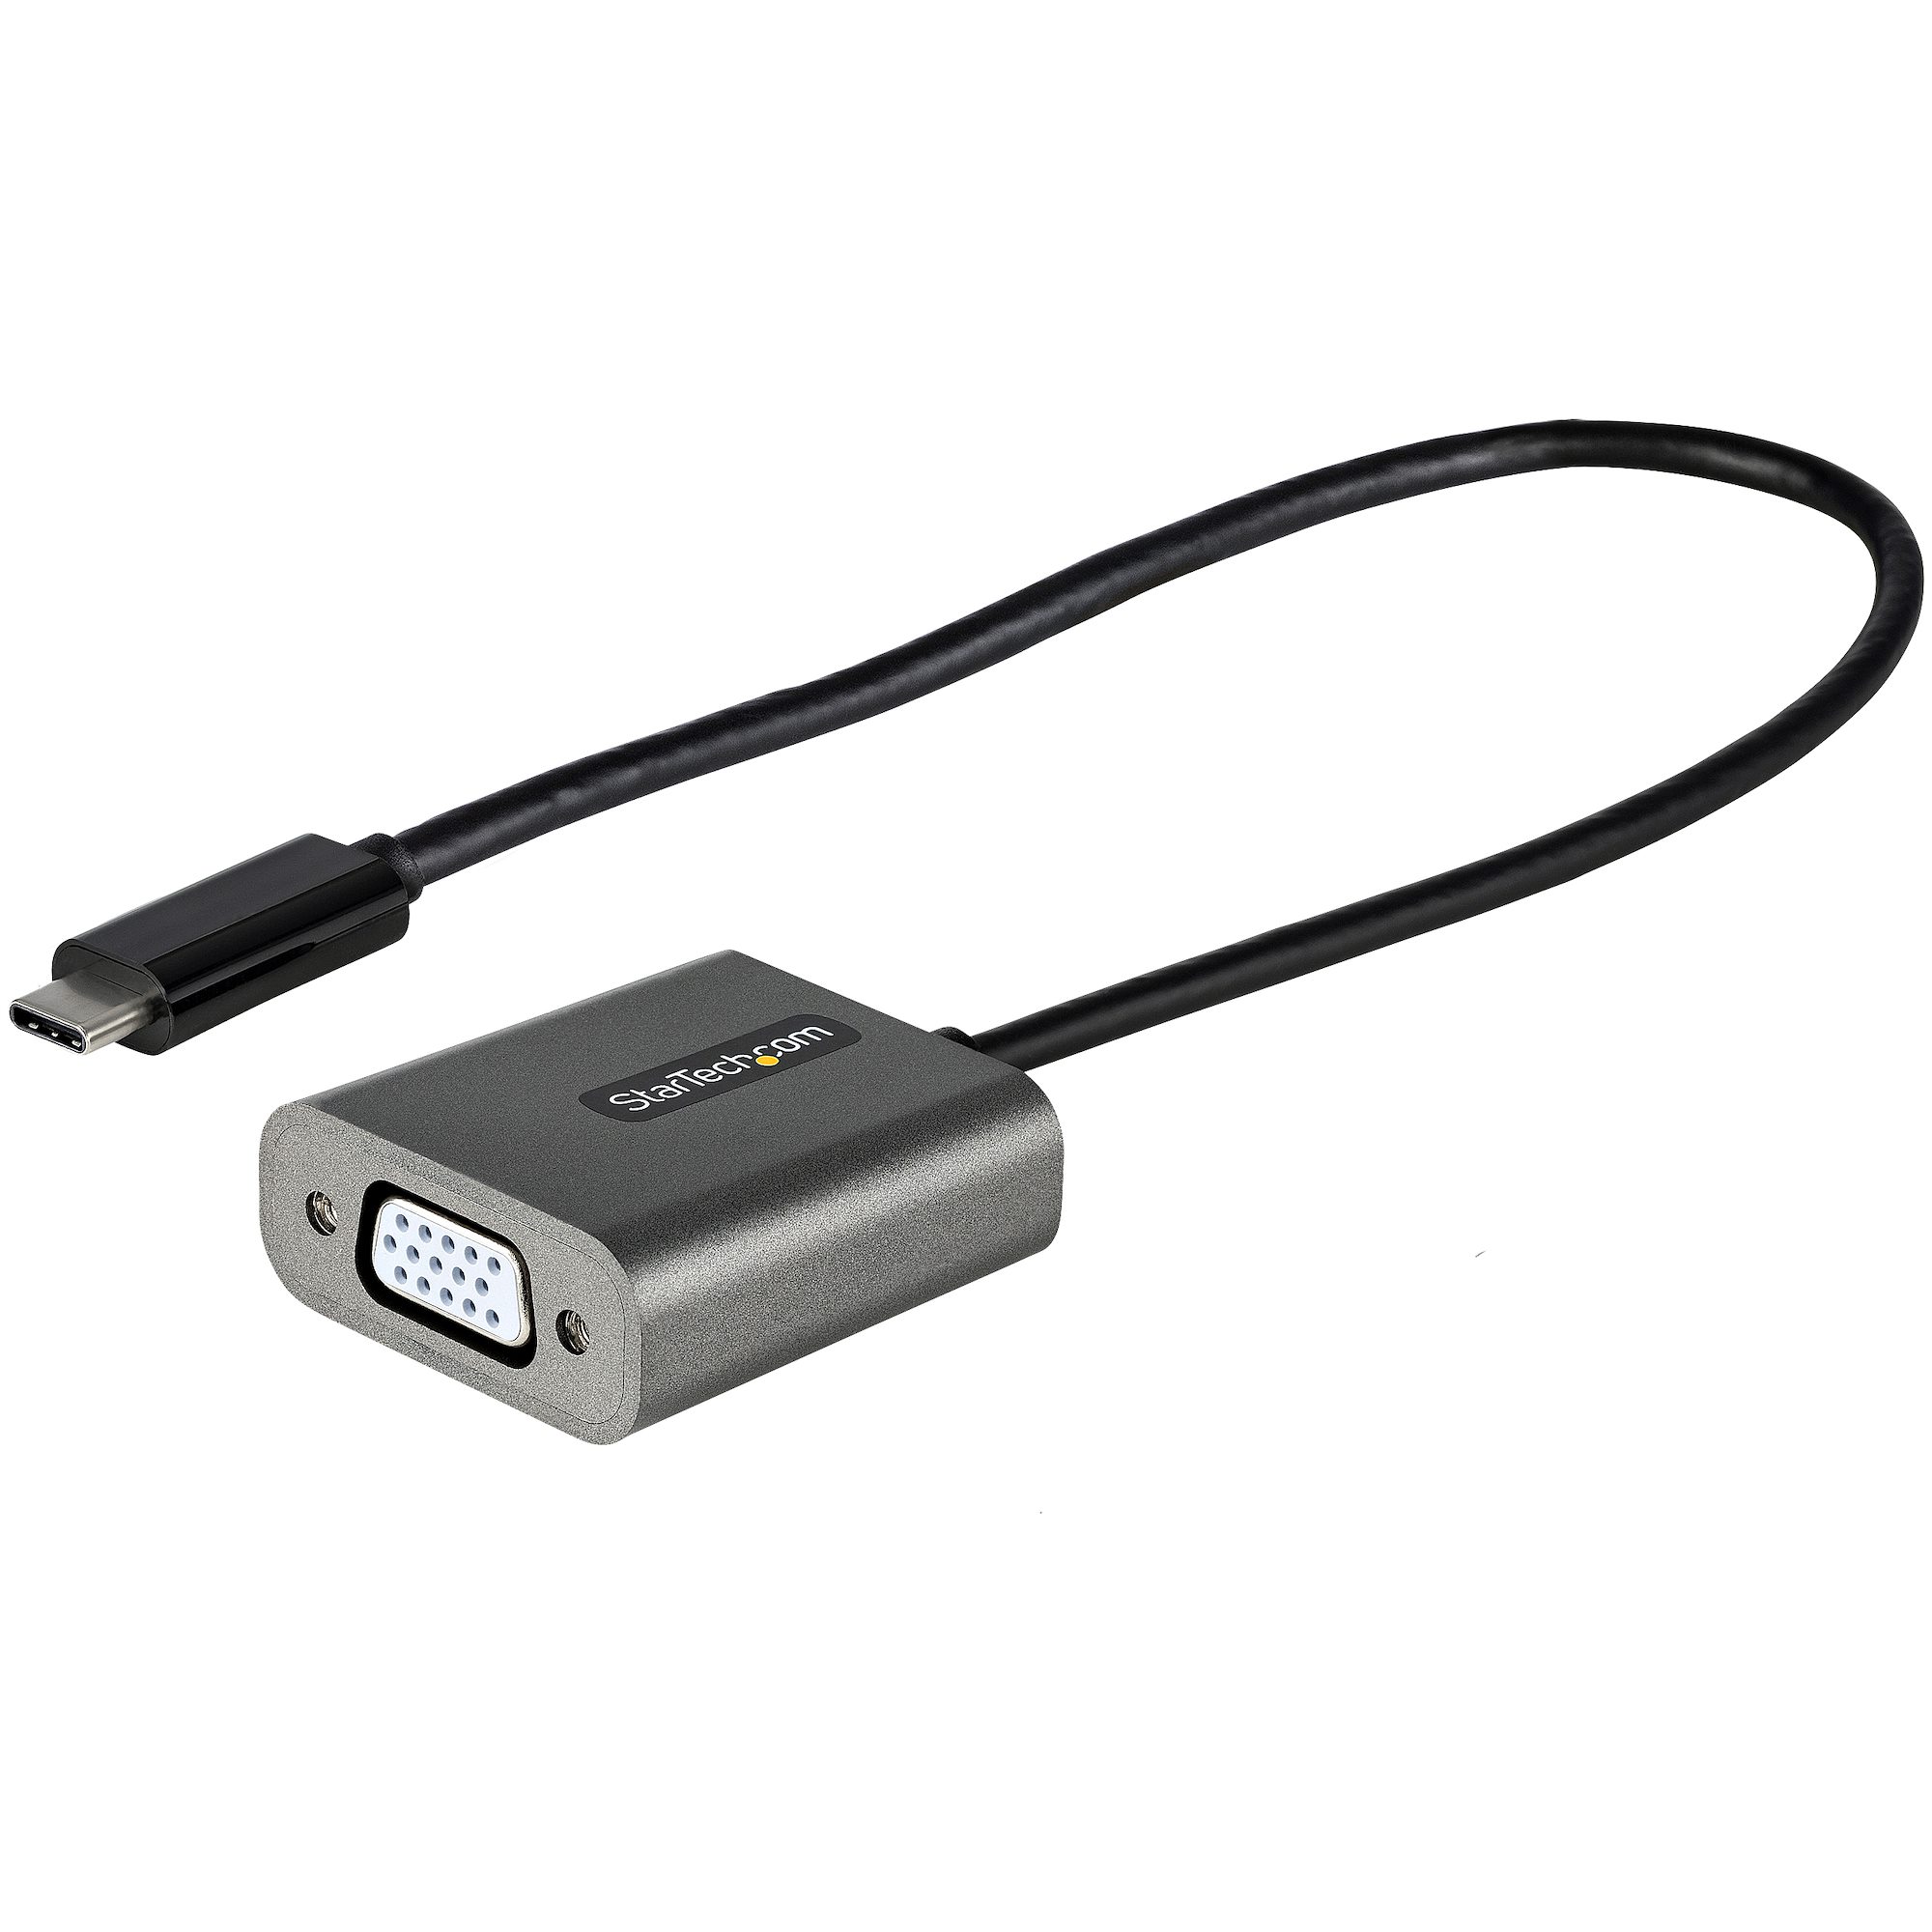 StarTech.com USB-C to VGA Adapter - Black - 1080p - Video Converter For  Your MacBook Pro - USB C to VGA Display Dongle - Type-C to VGA Converter